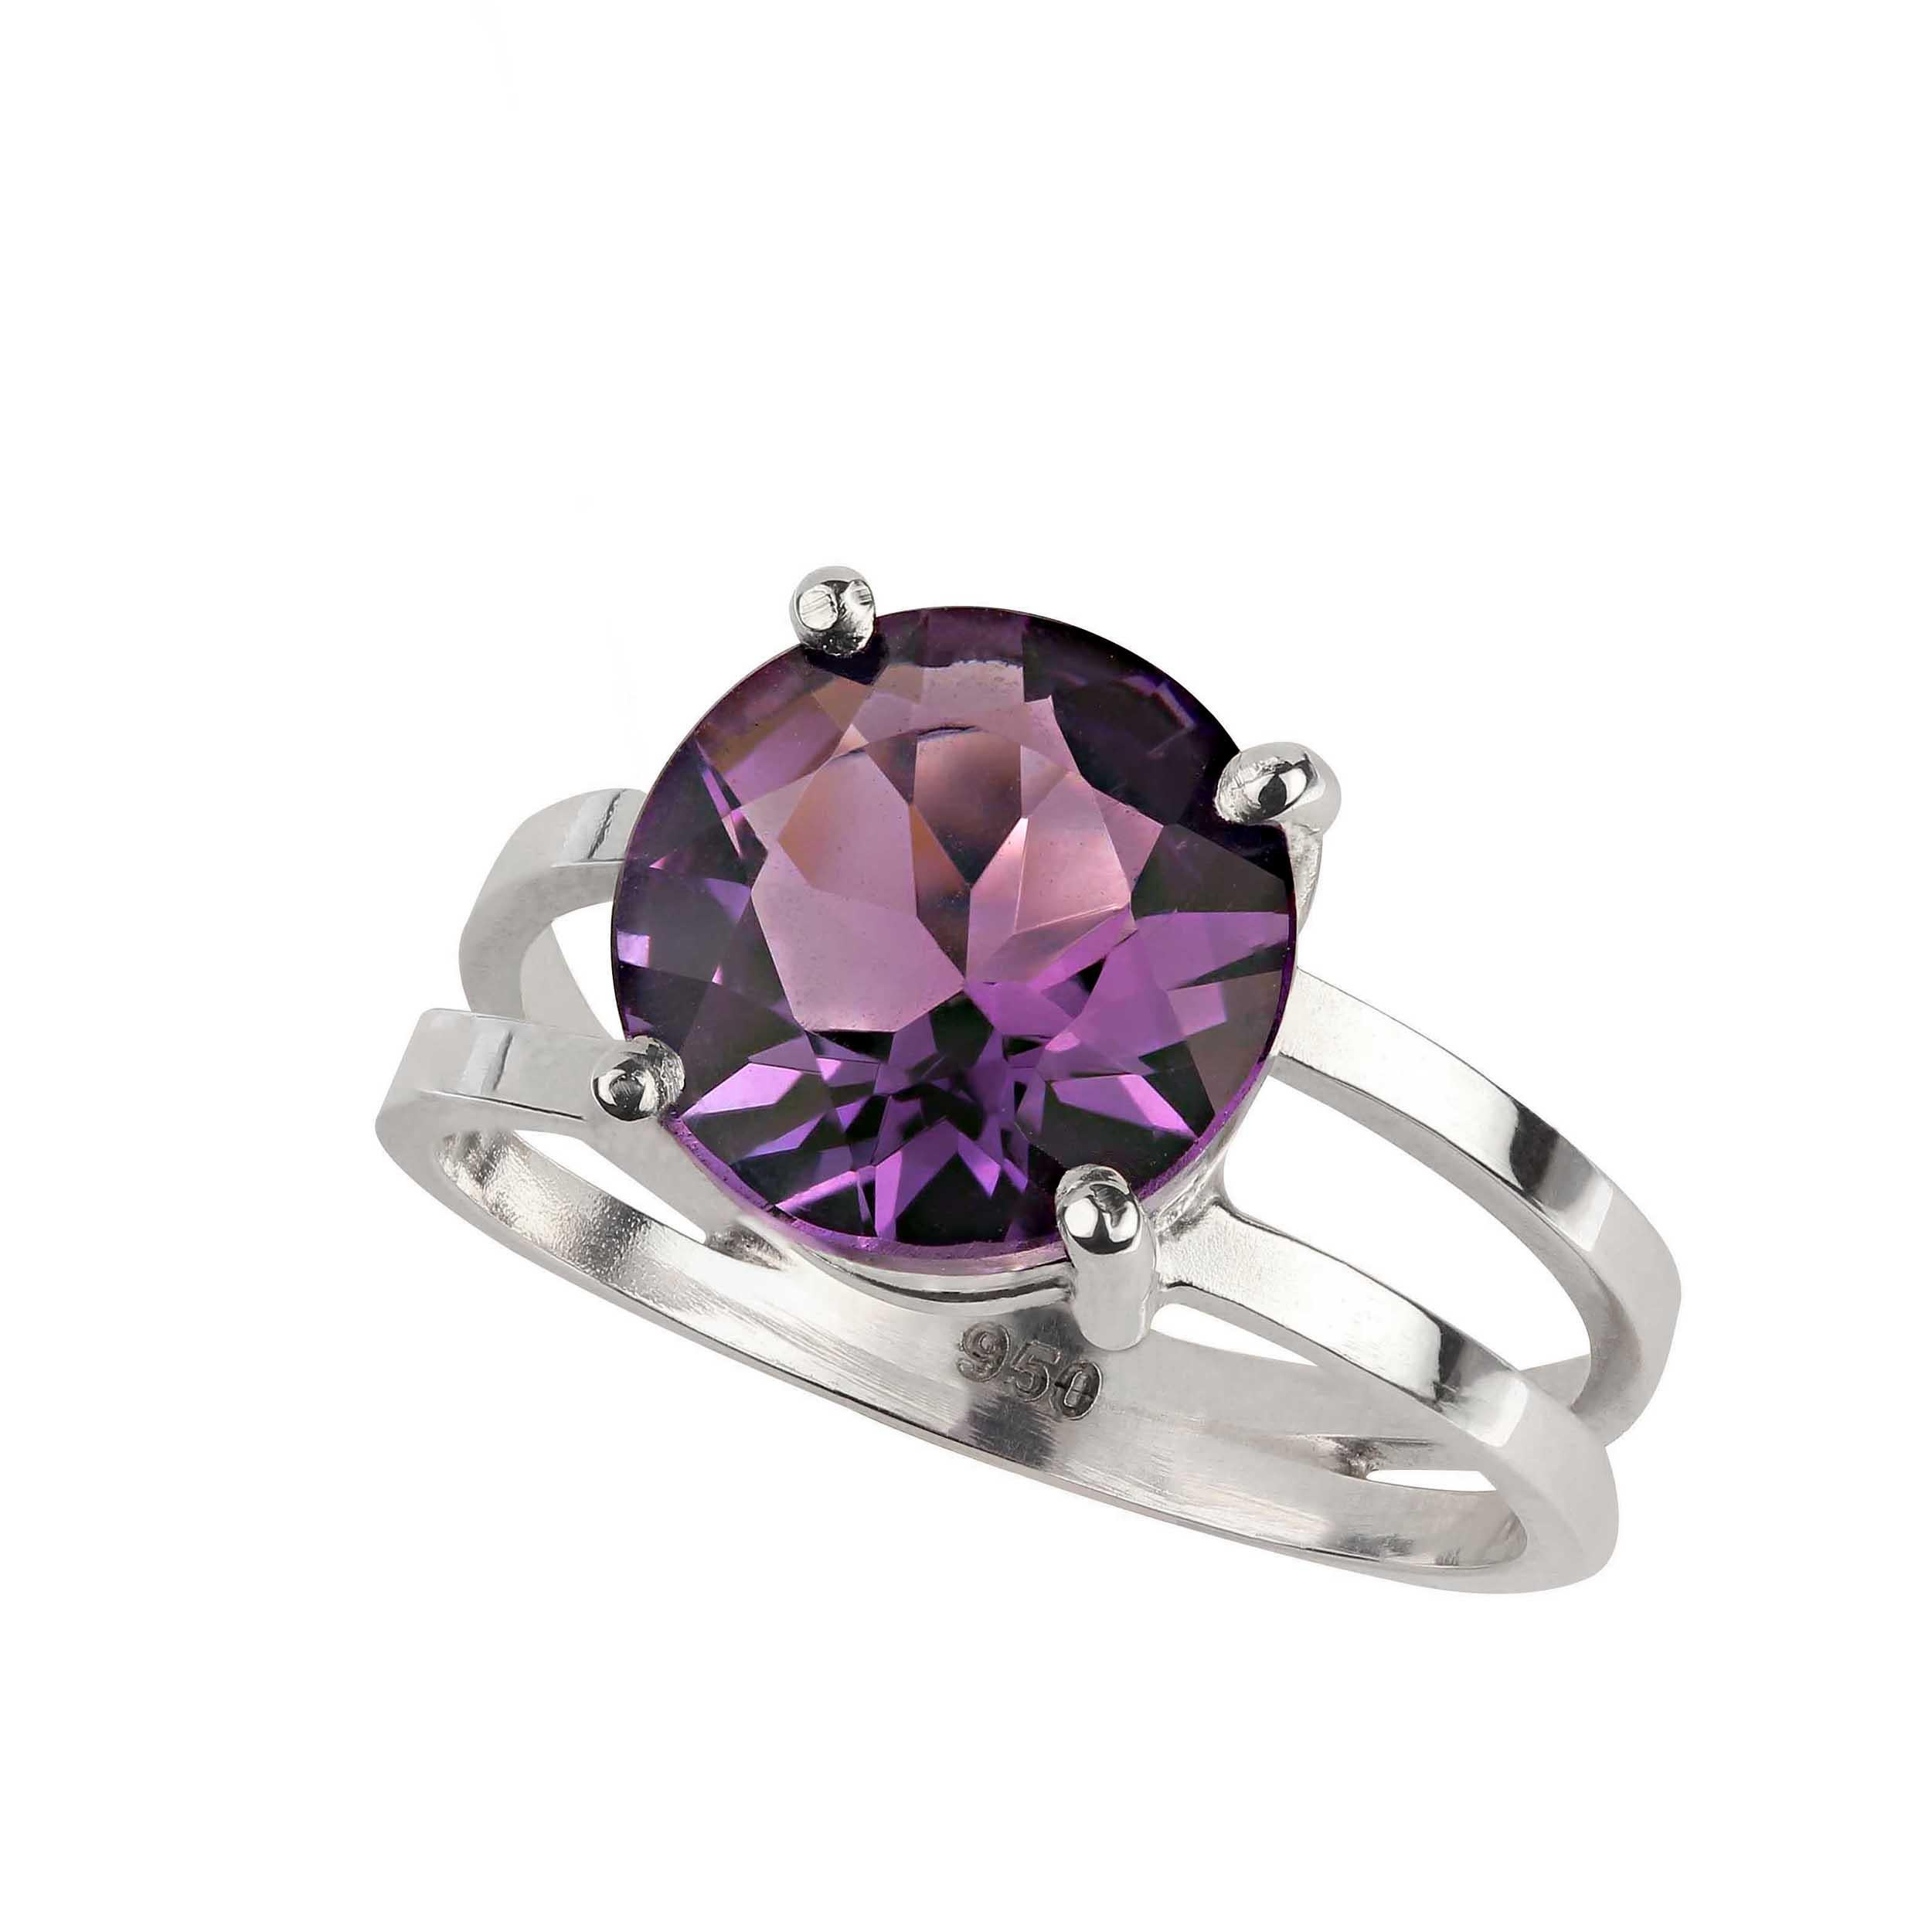 AJD Unusual Round 3.52 Carat Amethyst in Sterling Silver Ring In New Condition For Sale In Raleigh, NC